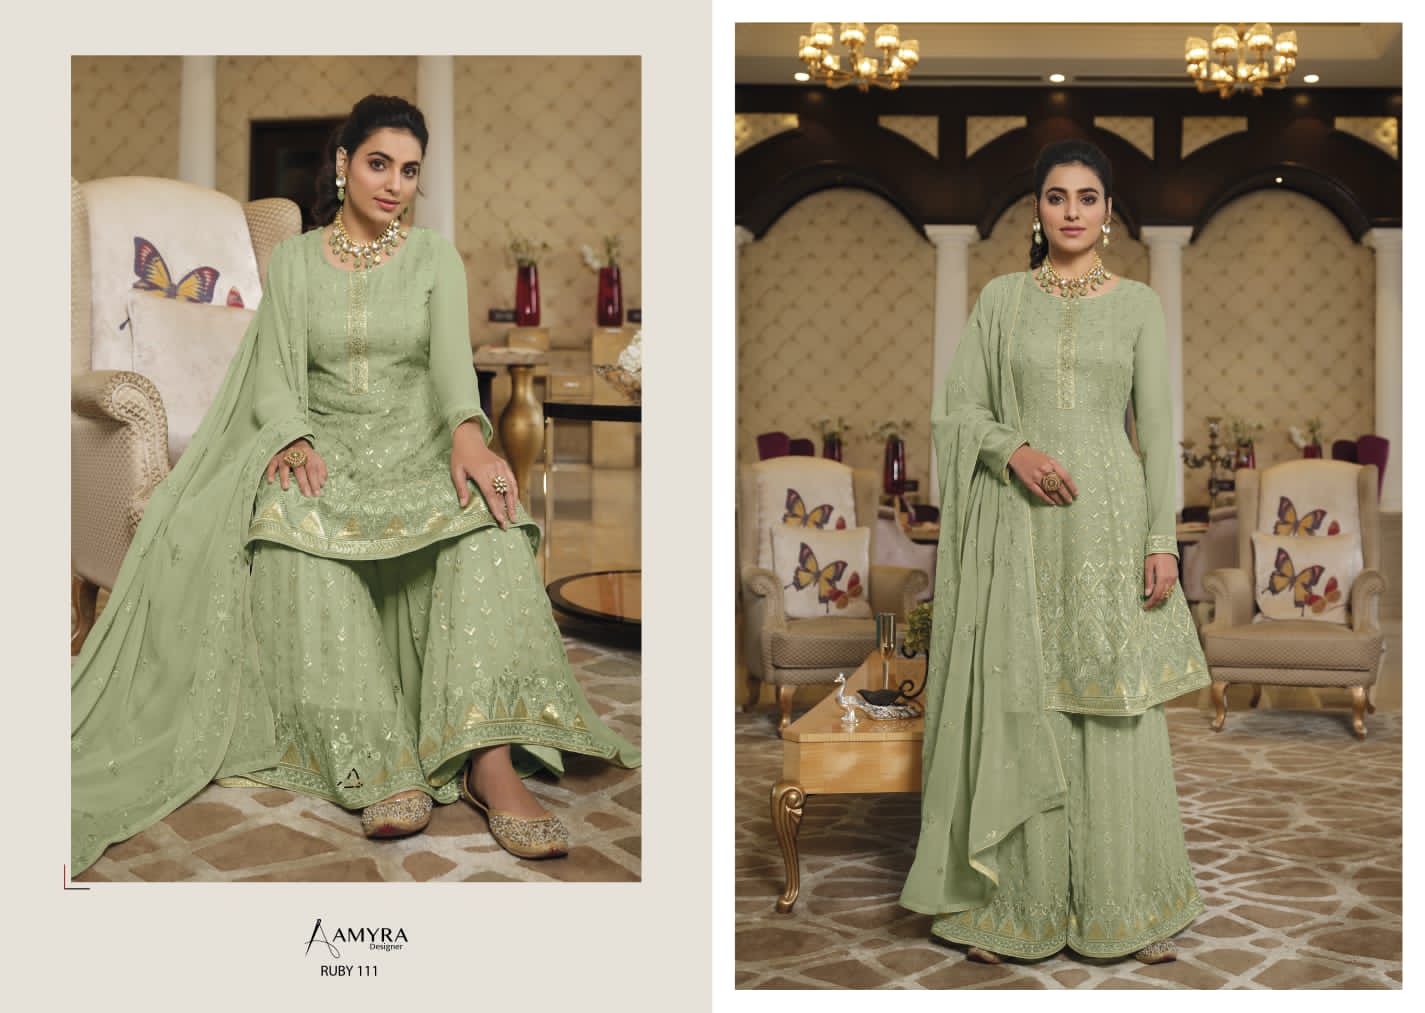 Ruby Vol 3 Amyra Designer Georgette Sharara Style Suits